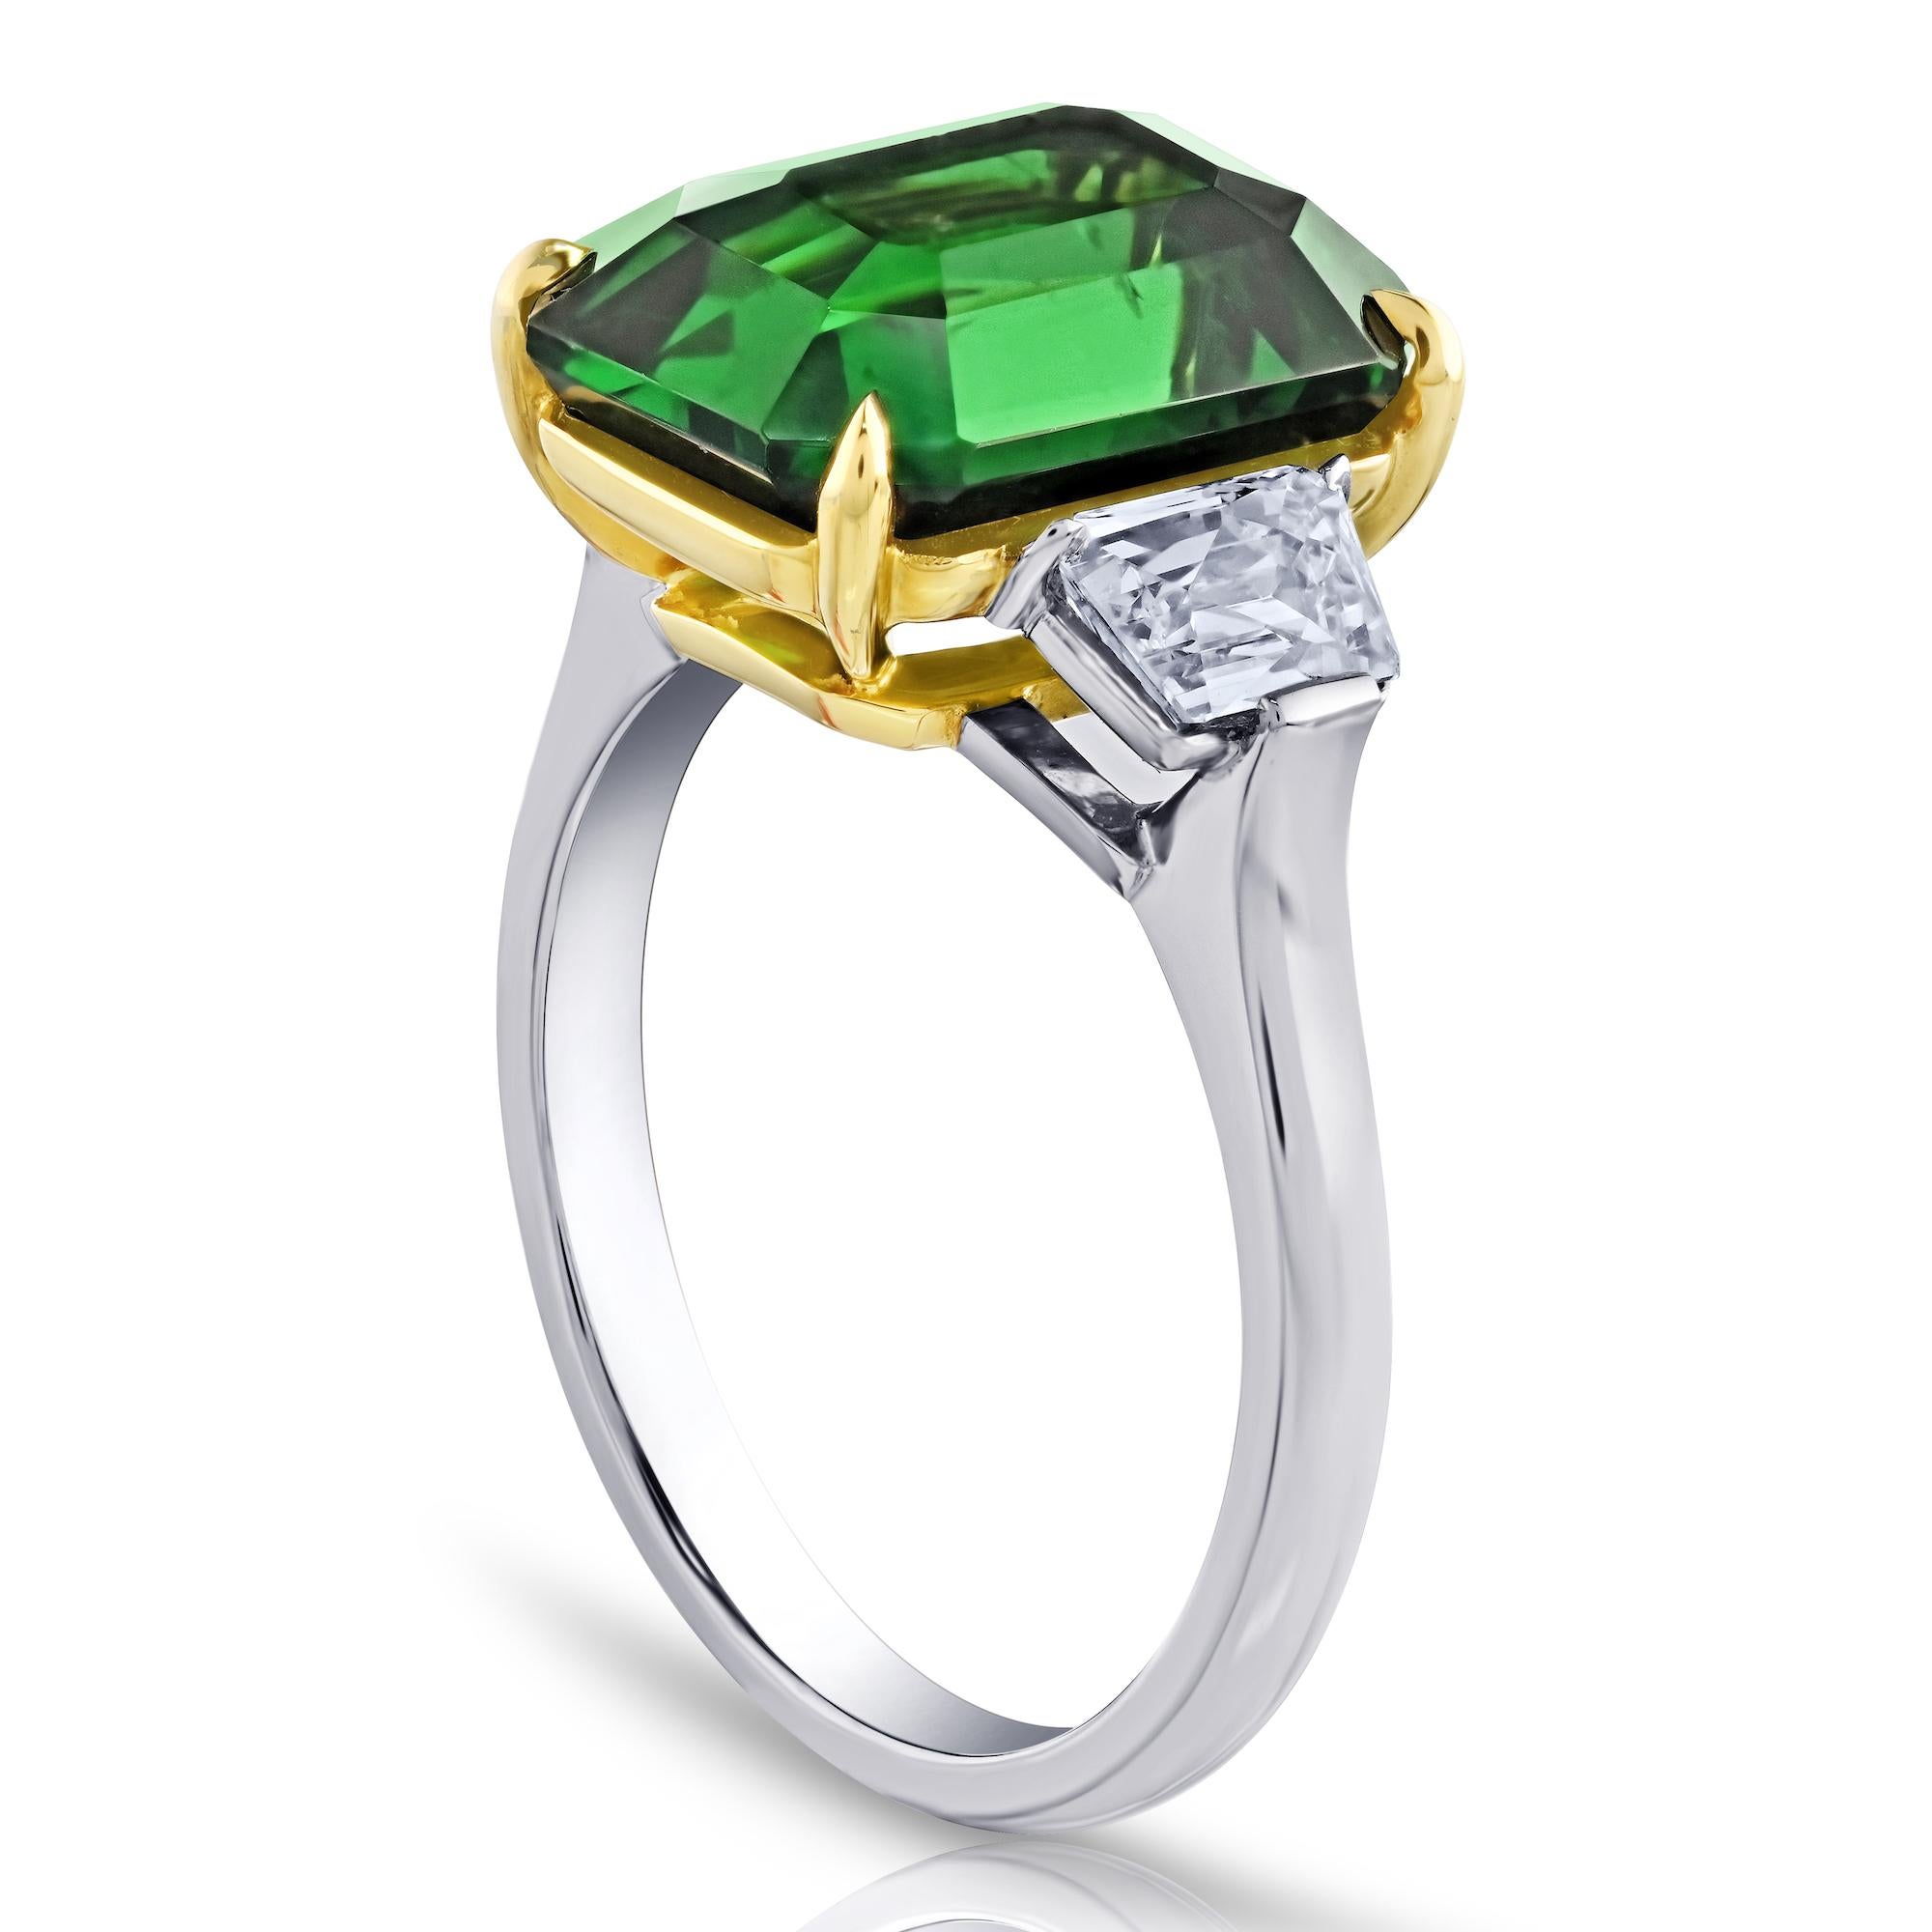 7.02 carat Emerald Green Tsavorite with French Cut Trapezoid Diamonds weighing .86 carats set in a Platinum and 18k Yellow Gold ring.